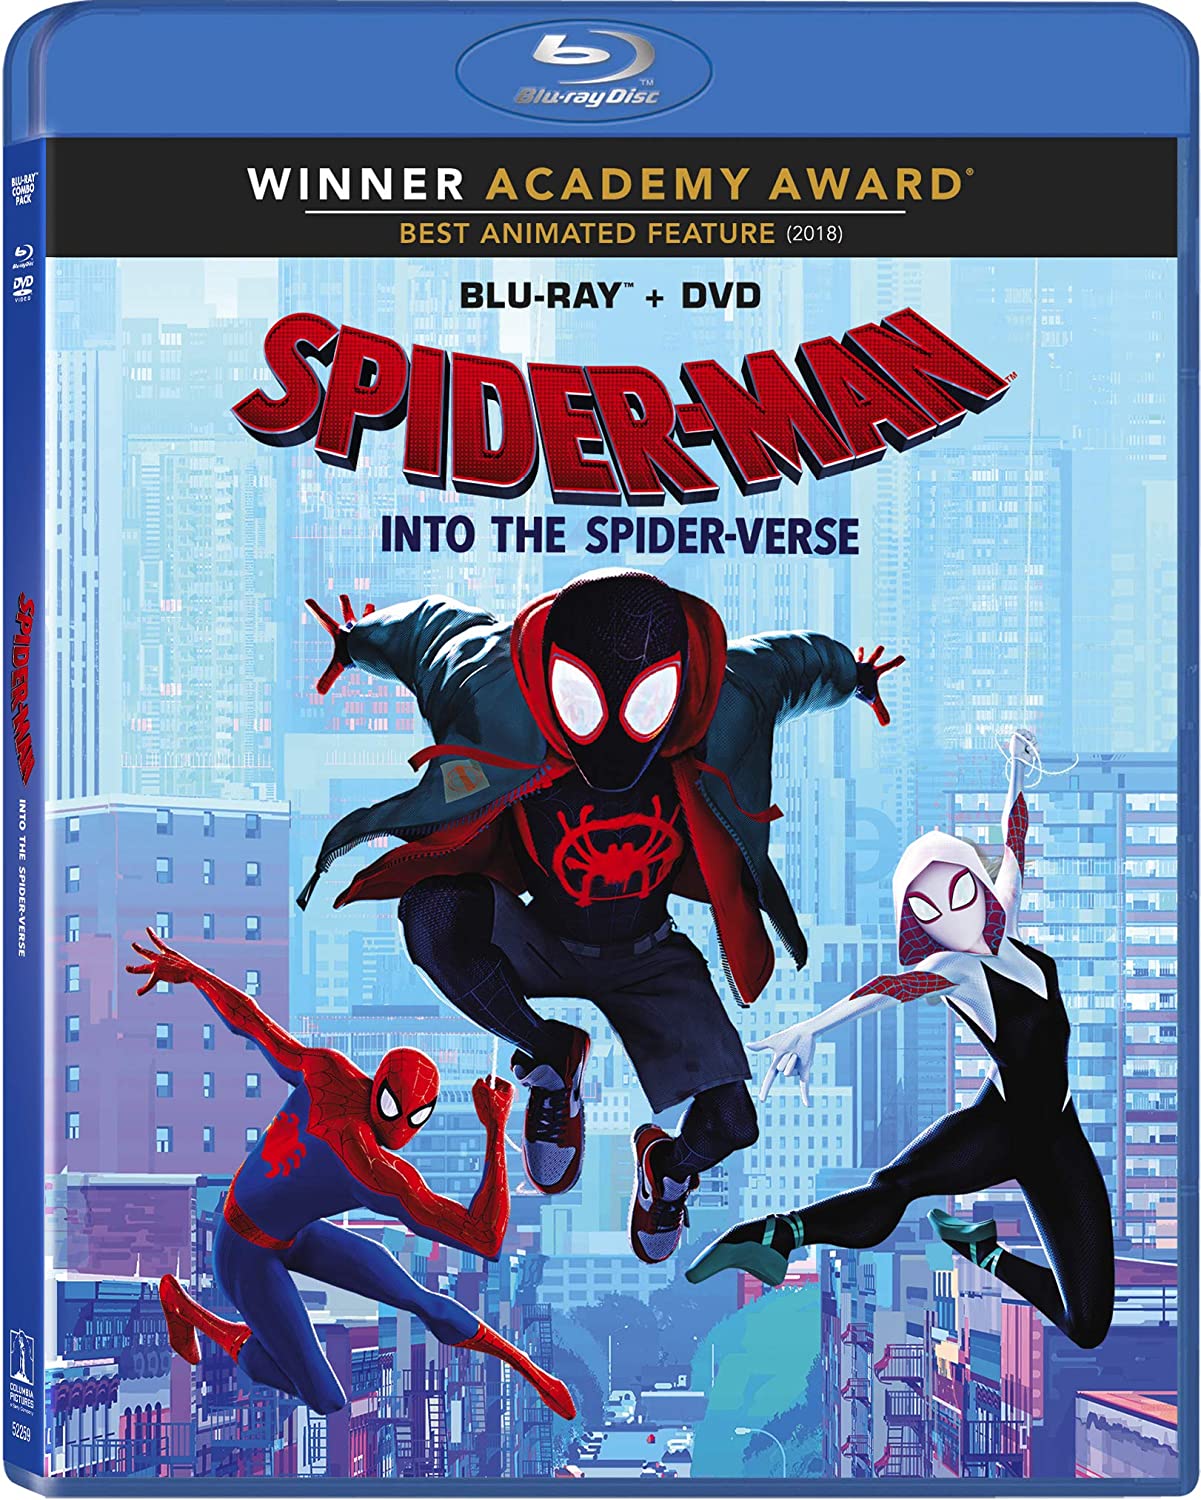 Spider Man: Into the Spider Verse (2018) 1080p-720p-480p BluRay ORG. [Dual Audio] [Hindi or English] x264 ESubs